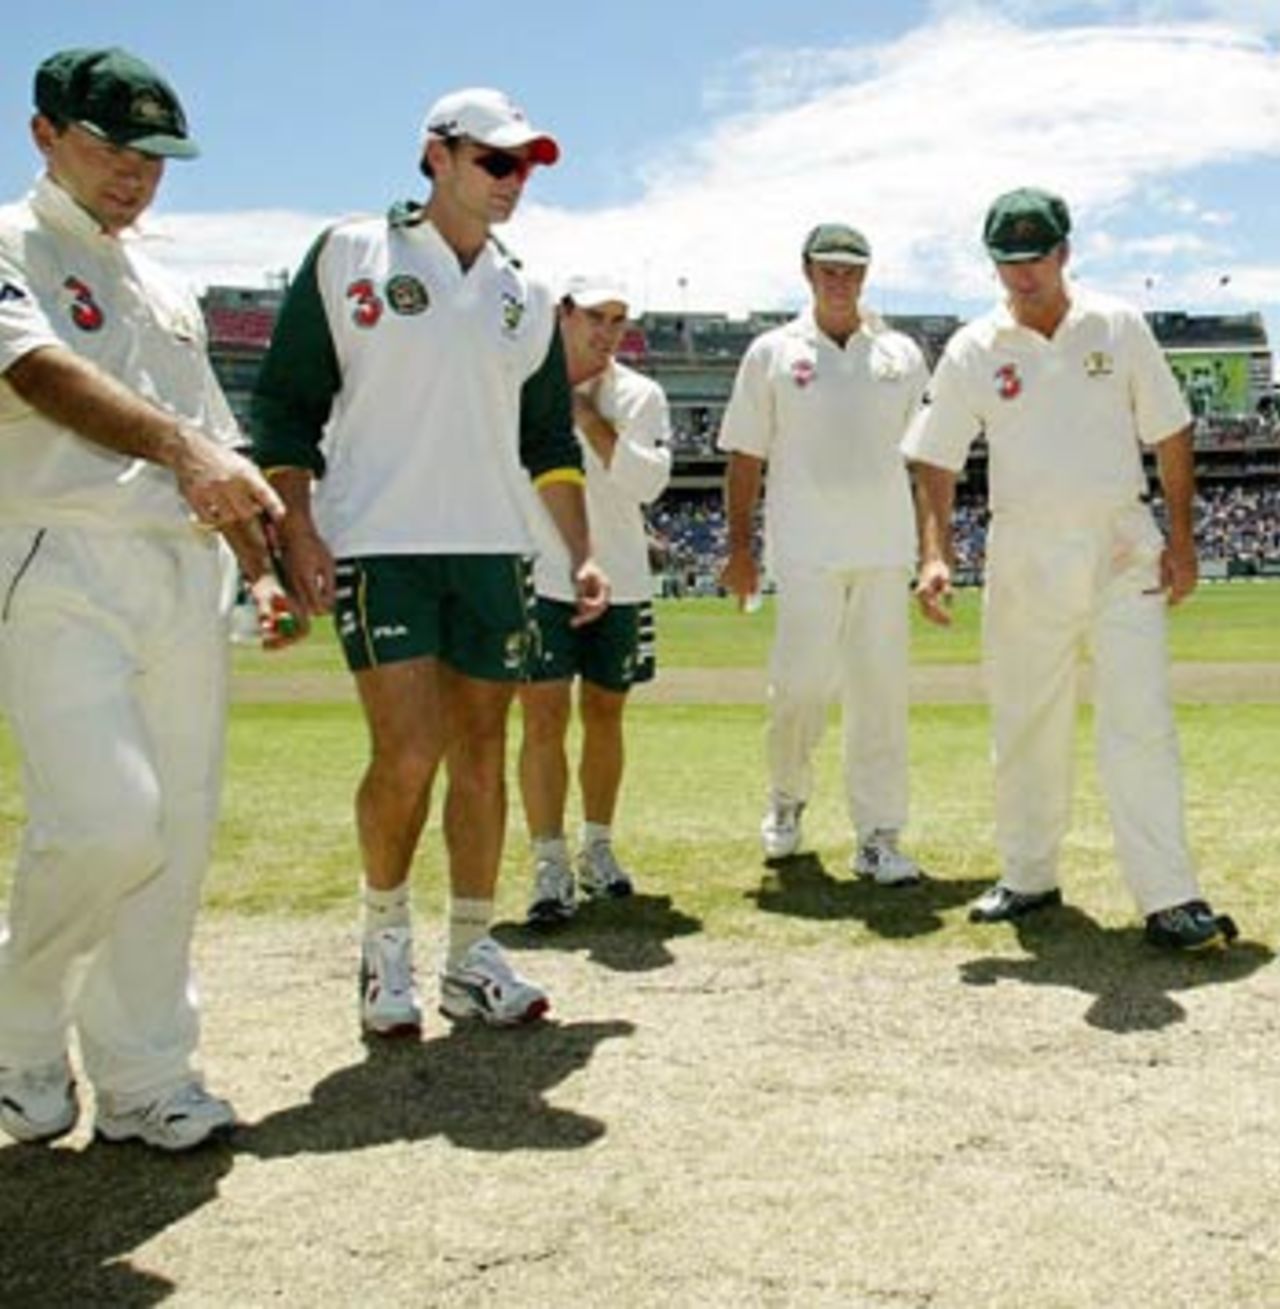 Ricky Ponting points to the repaired spot on the pitch that was the talking point after the game, Australia v India, 3rd Test, Melbourne, 5th day, December 30, 2003